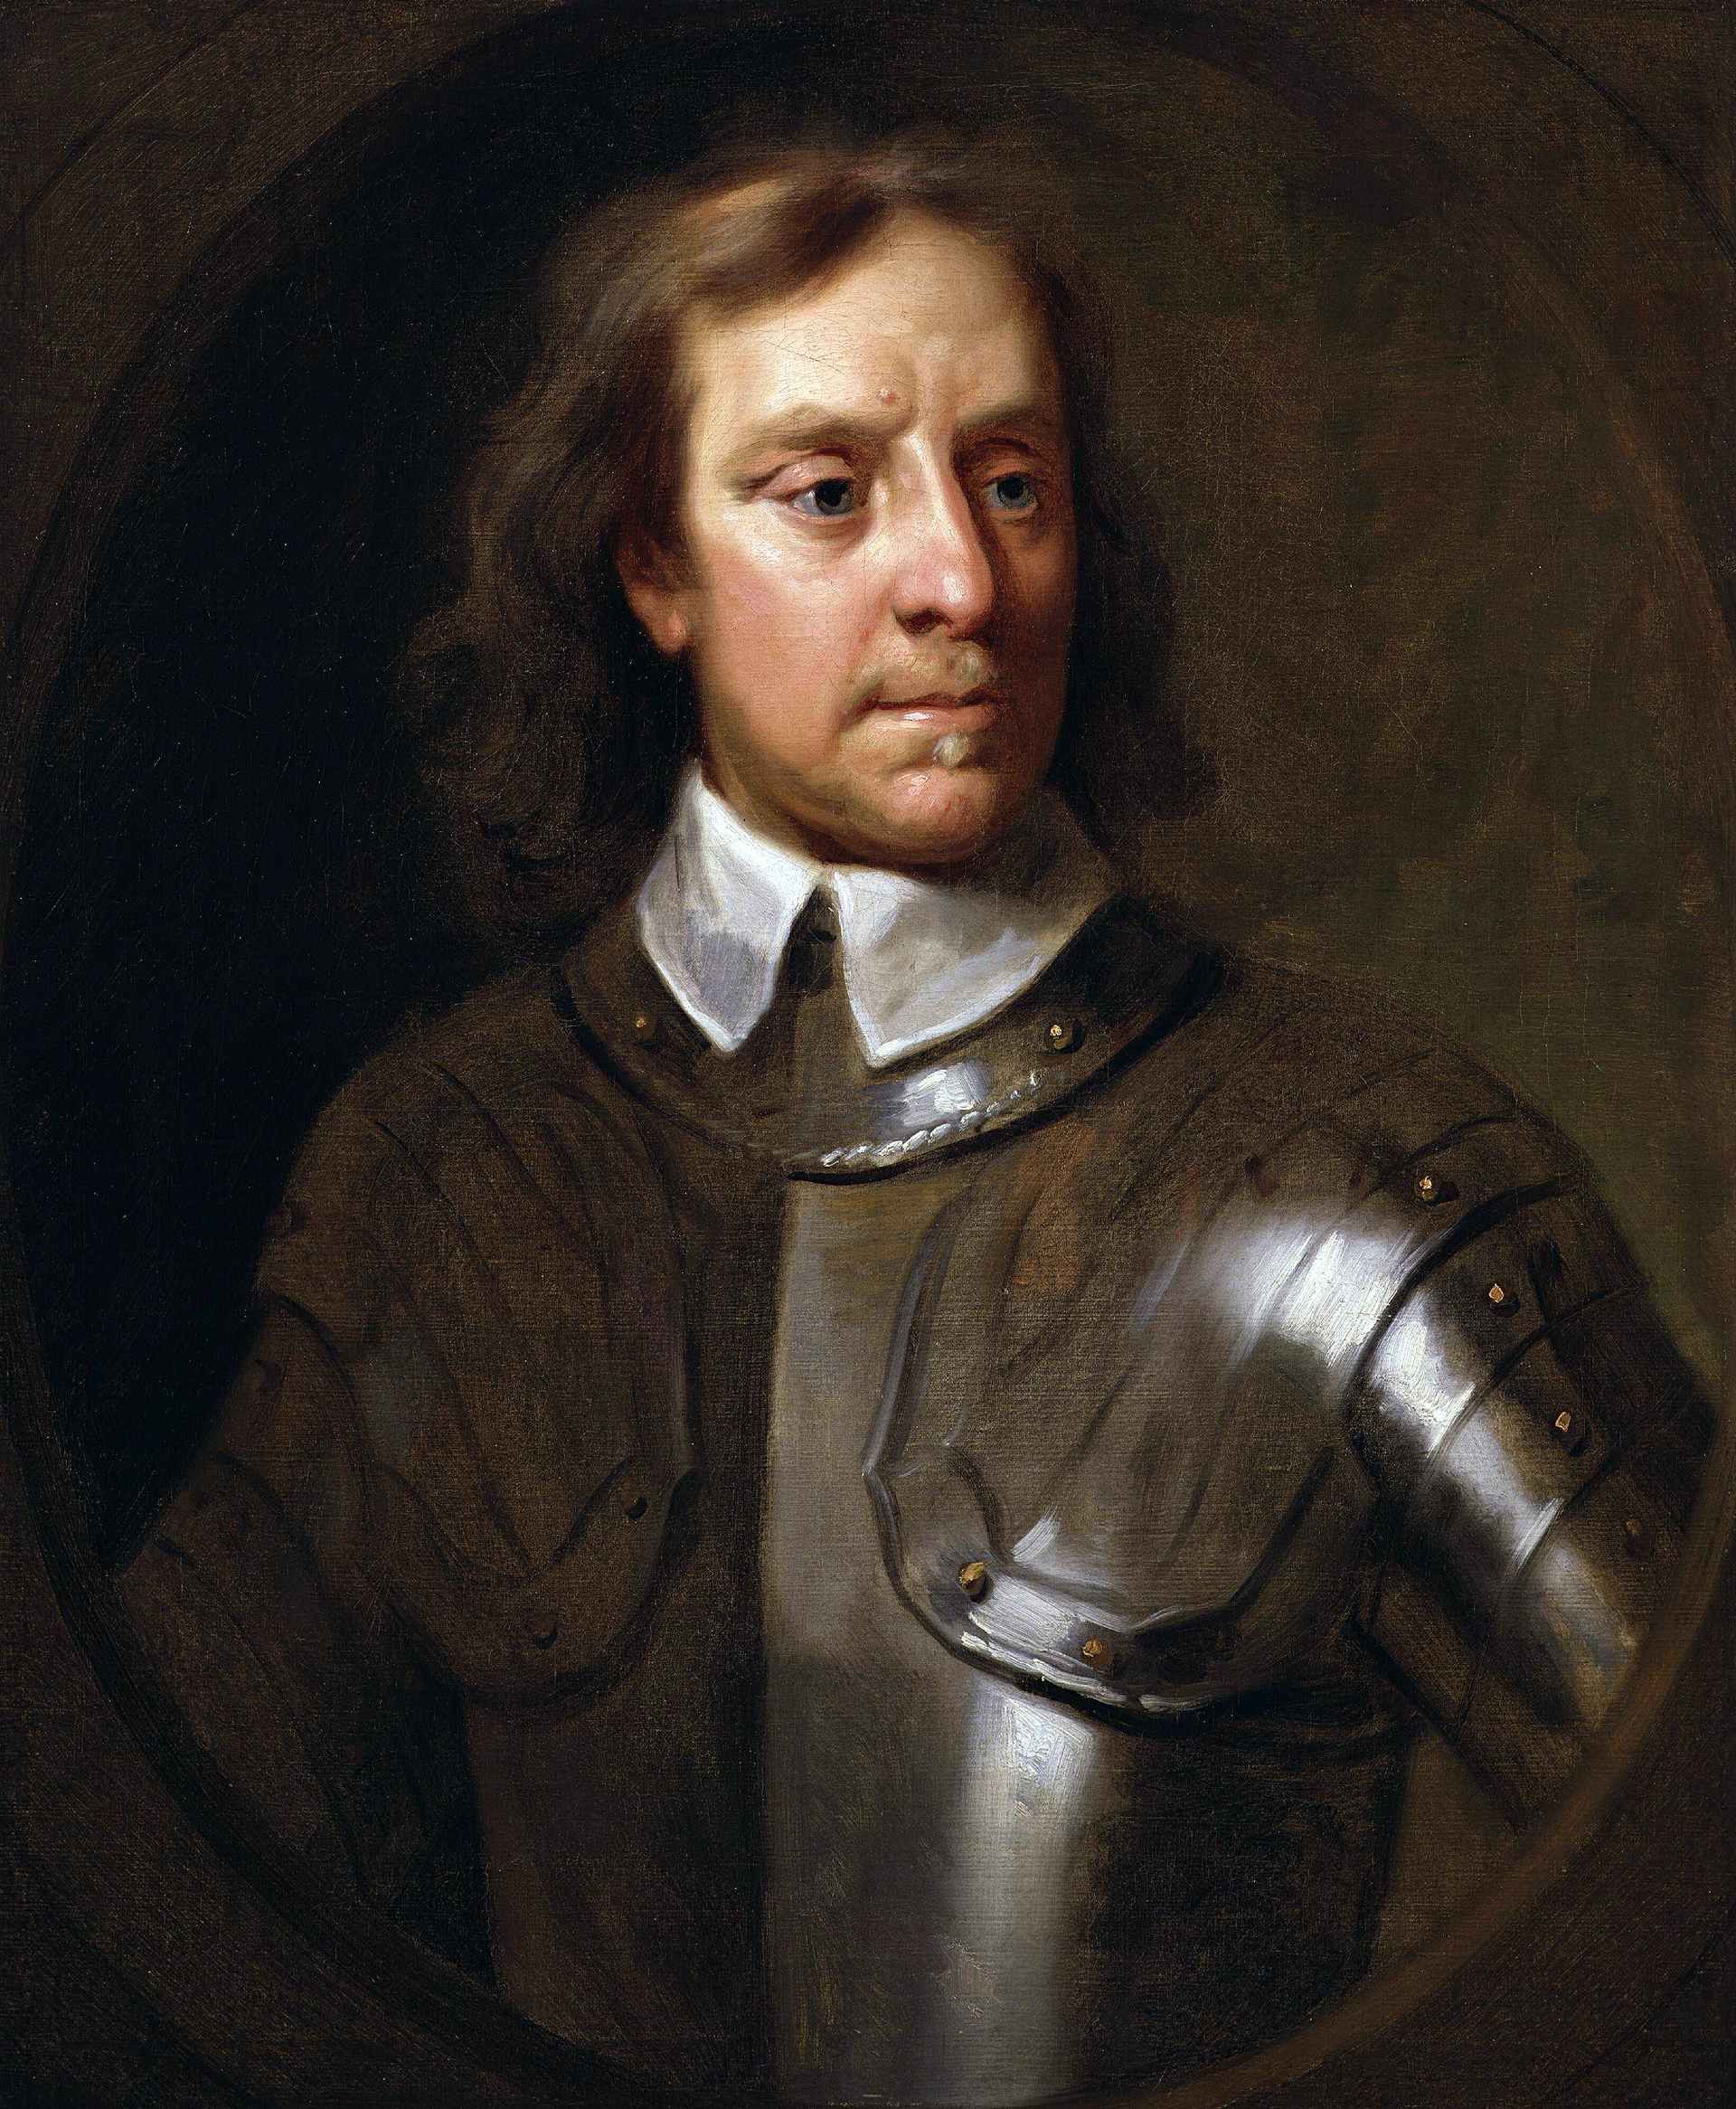 A portrait of a man with a solemn expression, featuring a 17th-century hairstyle with shoulder-length curls parting in the middle. He has a prominent nose, a small mouth, and wears a plain white collar over a dark, armoured outfit with a rounded shoulder plate reflecting light, indicating a metallic surface. The background is plain and dark, focusing attention on the subject. The painting style is realistic with fine details, particularly on the facial features and the texture of the armour.